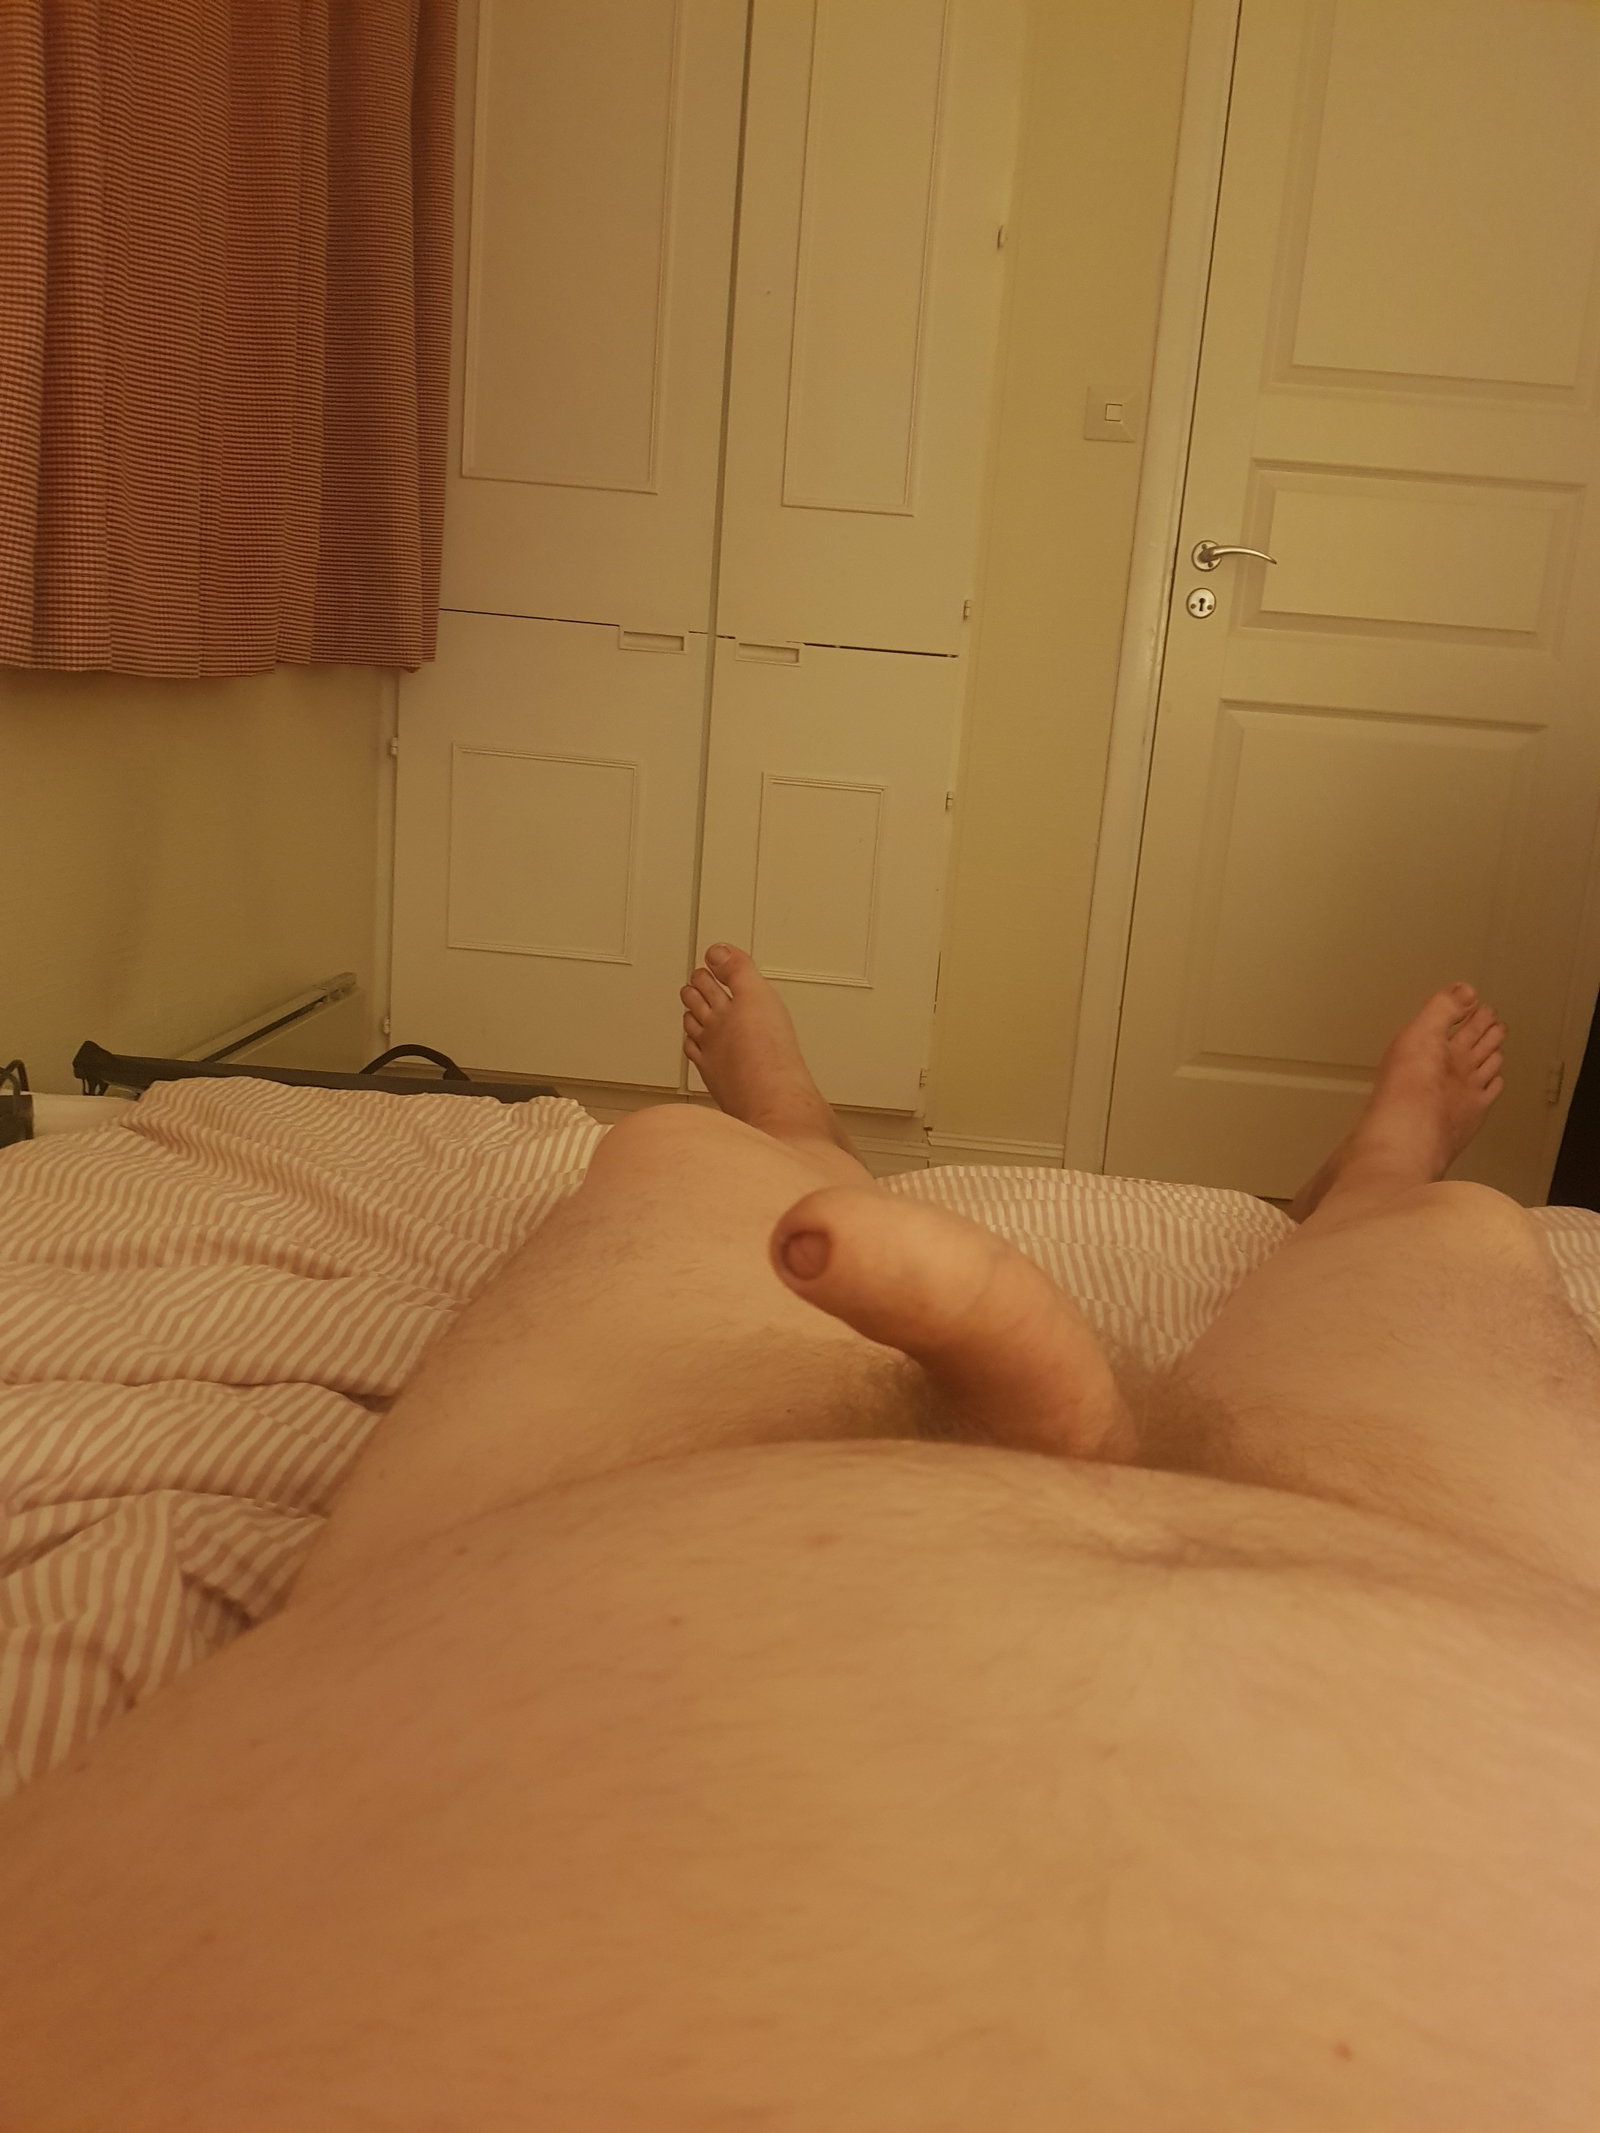 Photo by Hardstone69 with the username @Hardstone69,  July 26, 2020 at 9:43 AM. The post is about the topic Rate my pussy or dick and the text says 'Hello girls and ladies in here! I think you are all beautiful and I would be happy if you rate my dick 😊 Believe it or not, but this viking-dick has been inside 178 girls 😈 And it still craves for more so if you are a super horny girl living in Norway..'